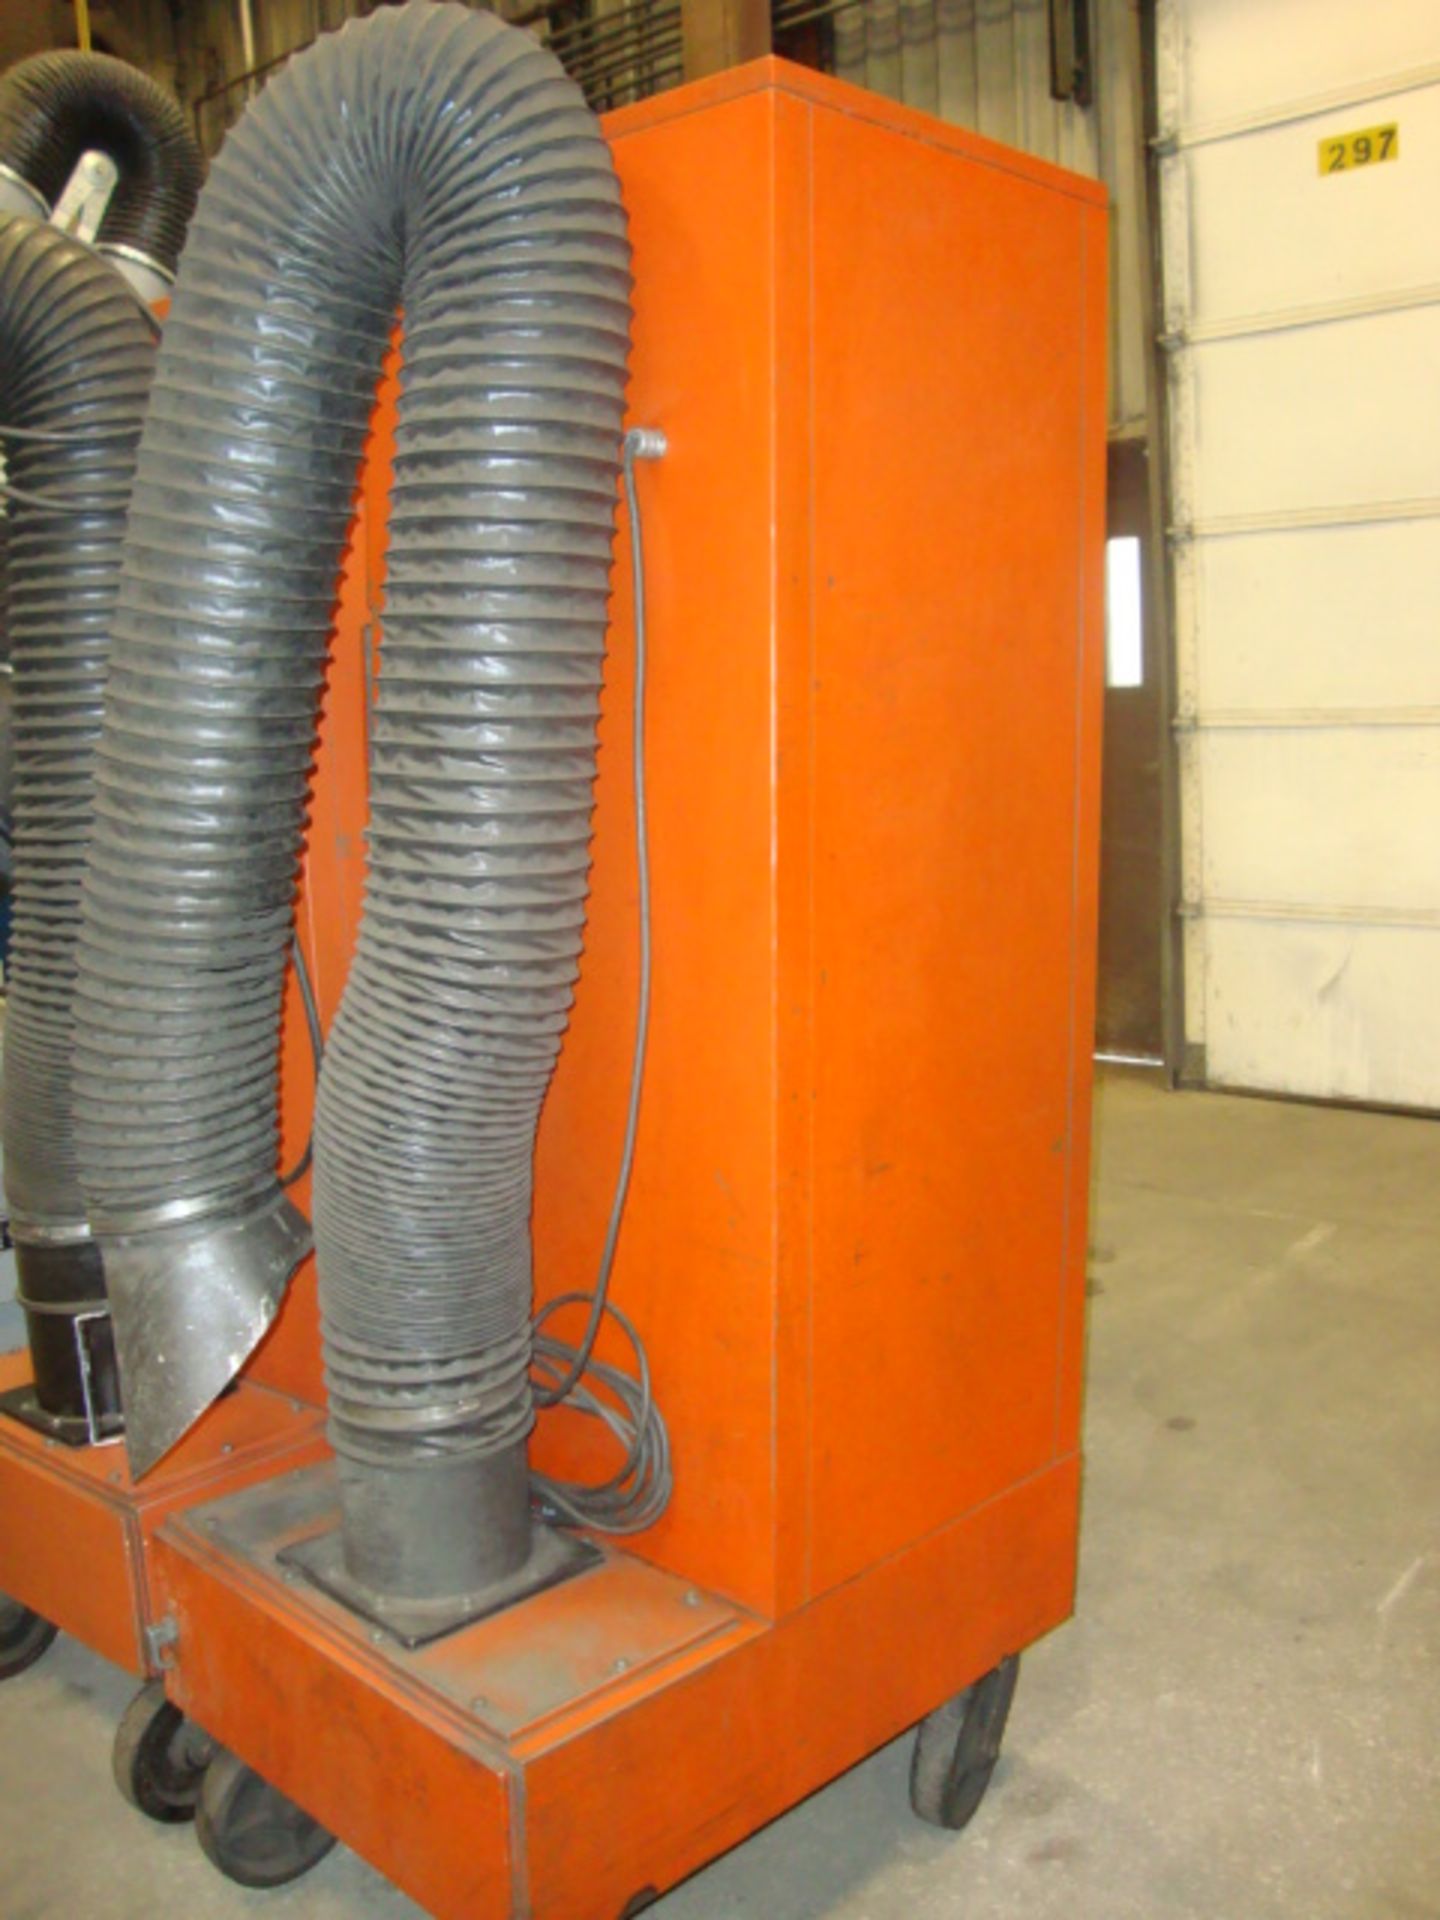 ROLL-AWAY MIST & DUST COLLECTOR, TRION, dust collection tube, roller base - Image 2 of 2